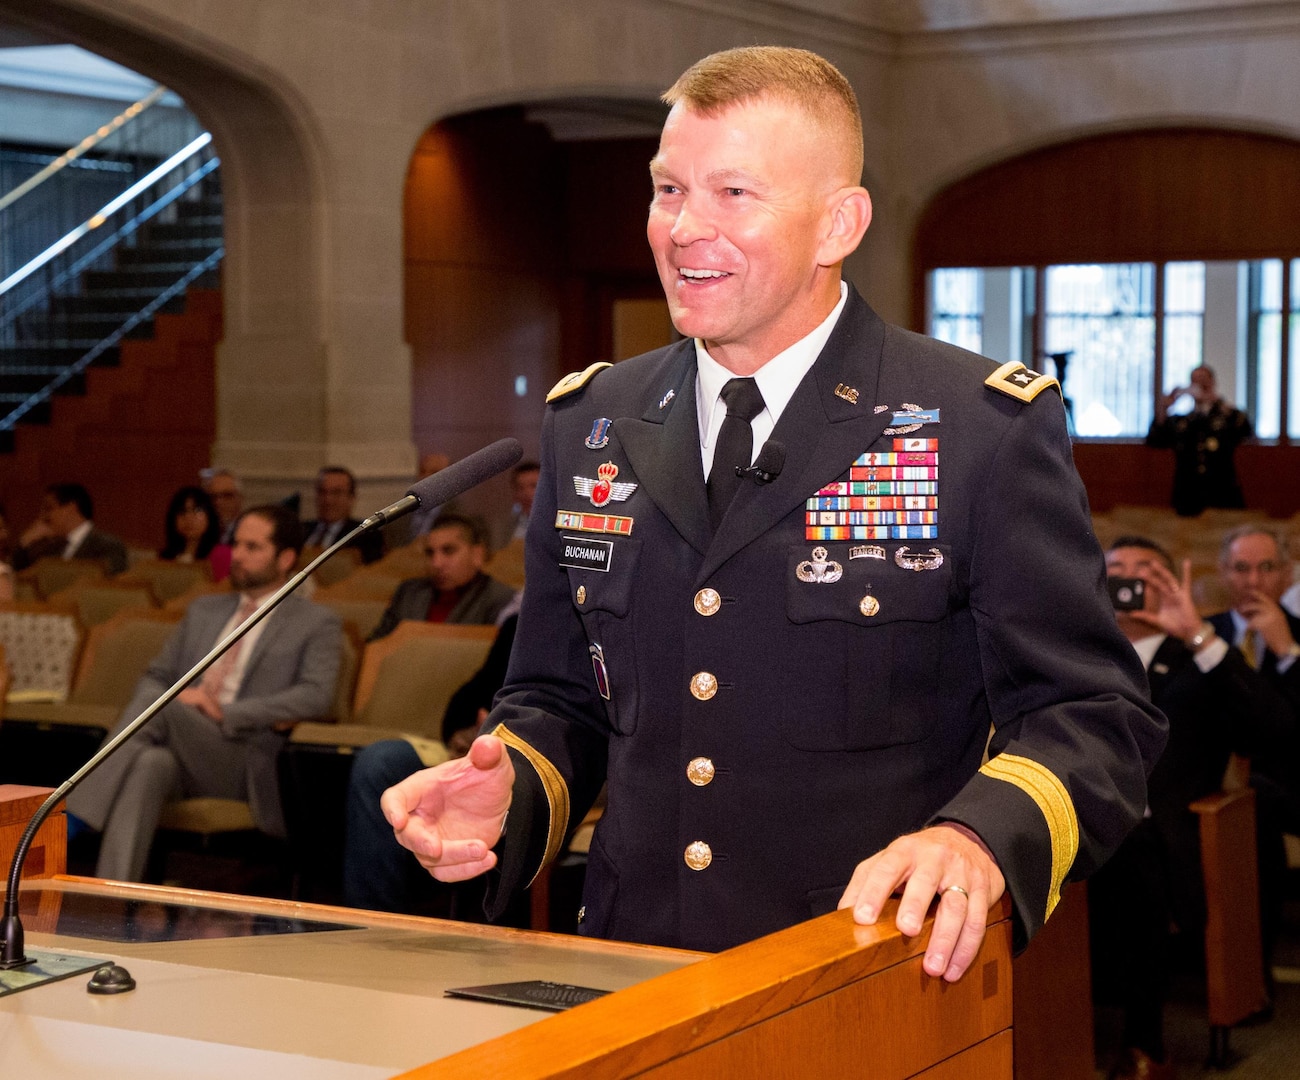 Lt. Gen. Jeffrey S. Buchanan, commander of U.S. Army North (Fifth Army) at Joint Base San Antonio-Fort Sam Houston, gives the opening remarks June 1 at City Hall in San Antonio during Army Birthday cake-cutting ceremony. The Army celebrates its 242nd birthday June 14. 